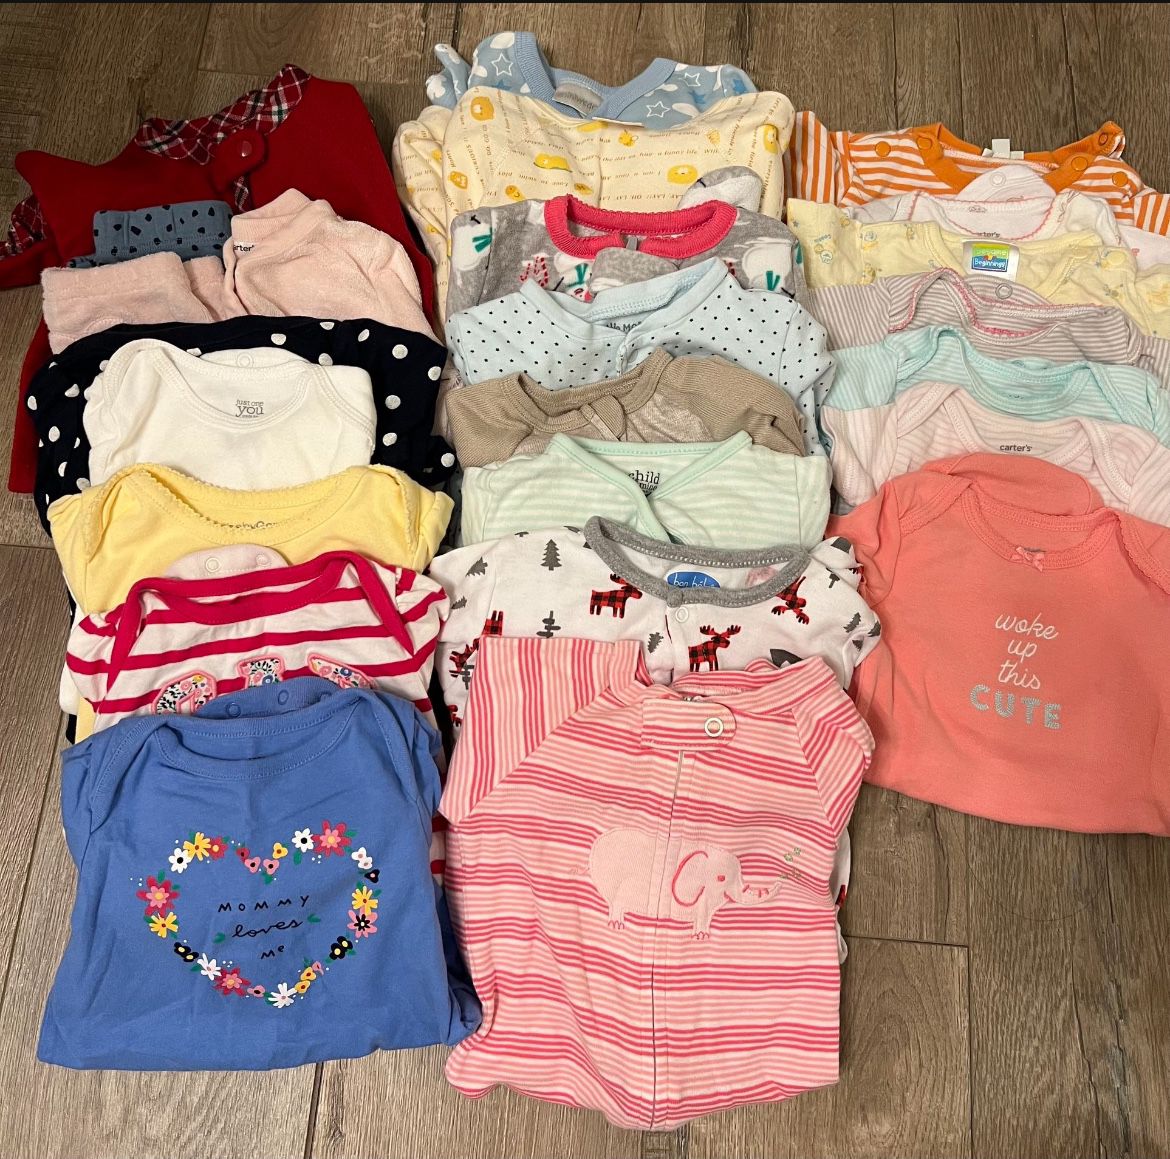 Baby Clothes 3-6 Months. 25+ Items For $20